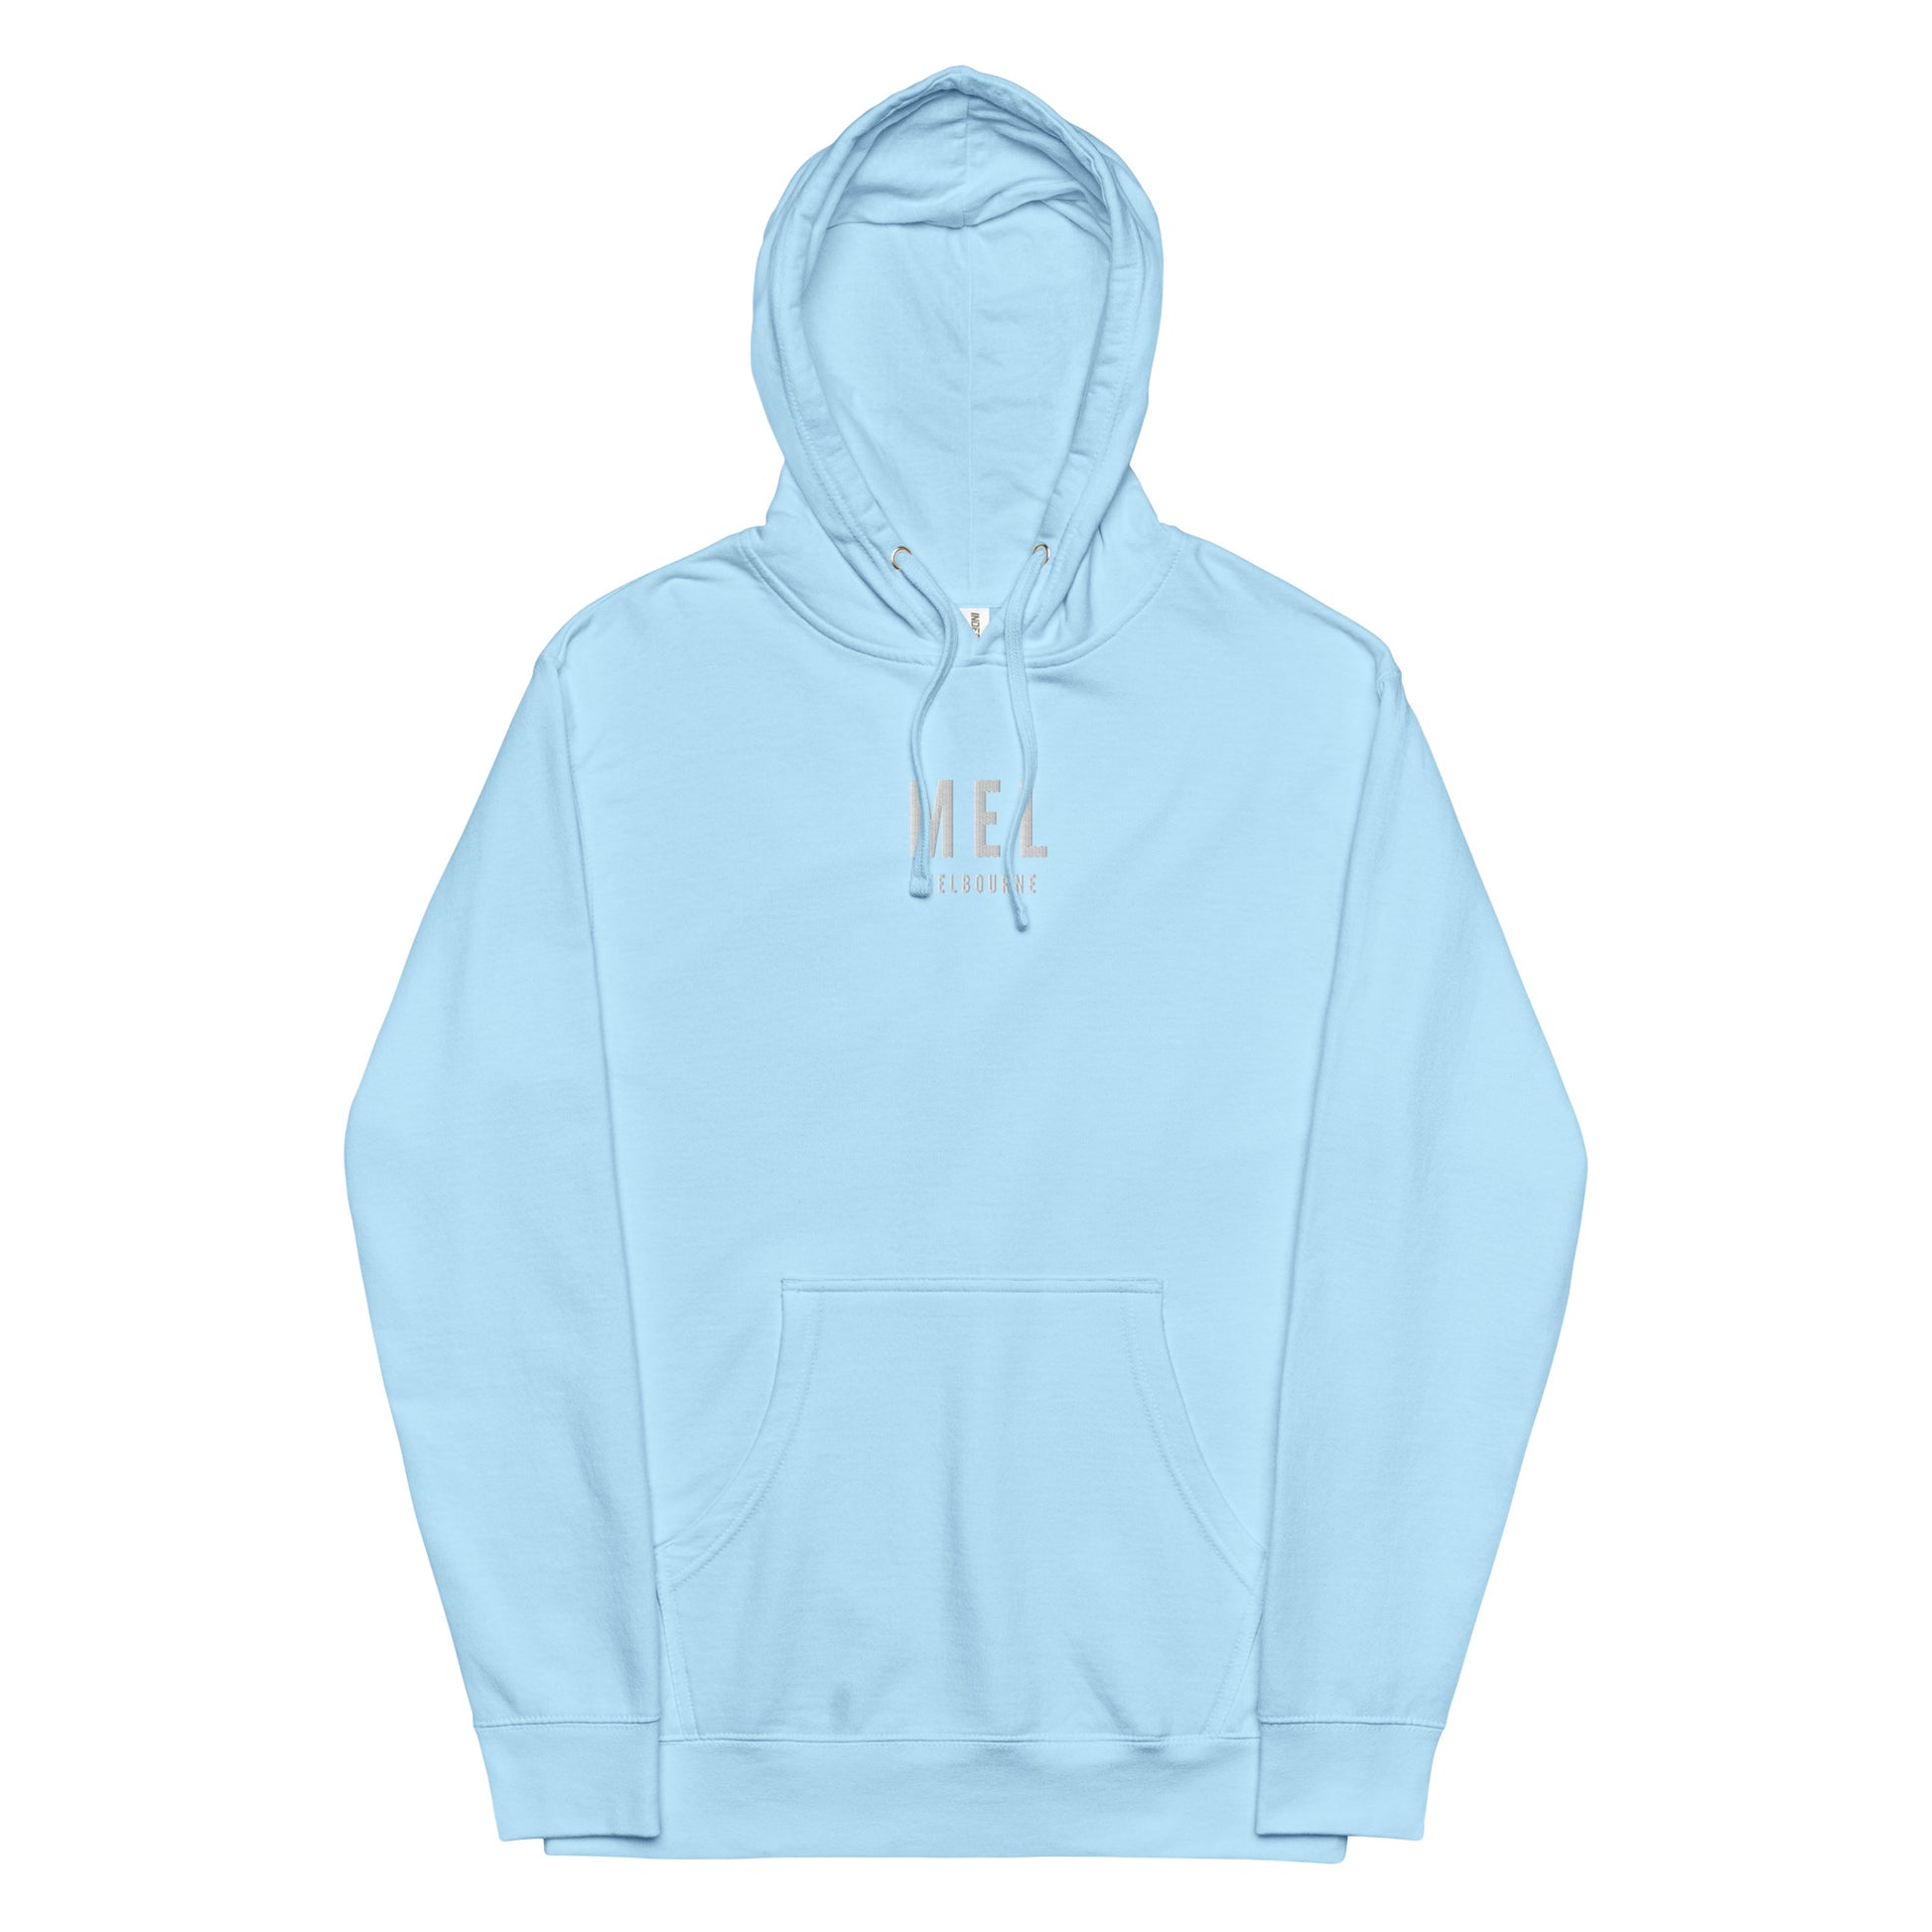 City Midweight Hoodie - White • MEL Melbourne • YHM Designs - Image 14